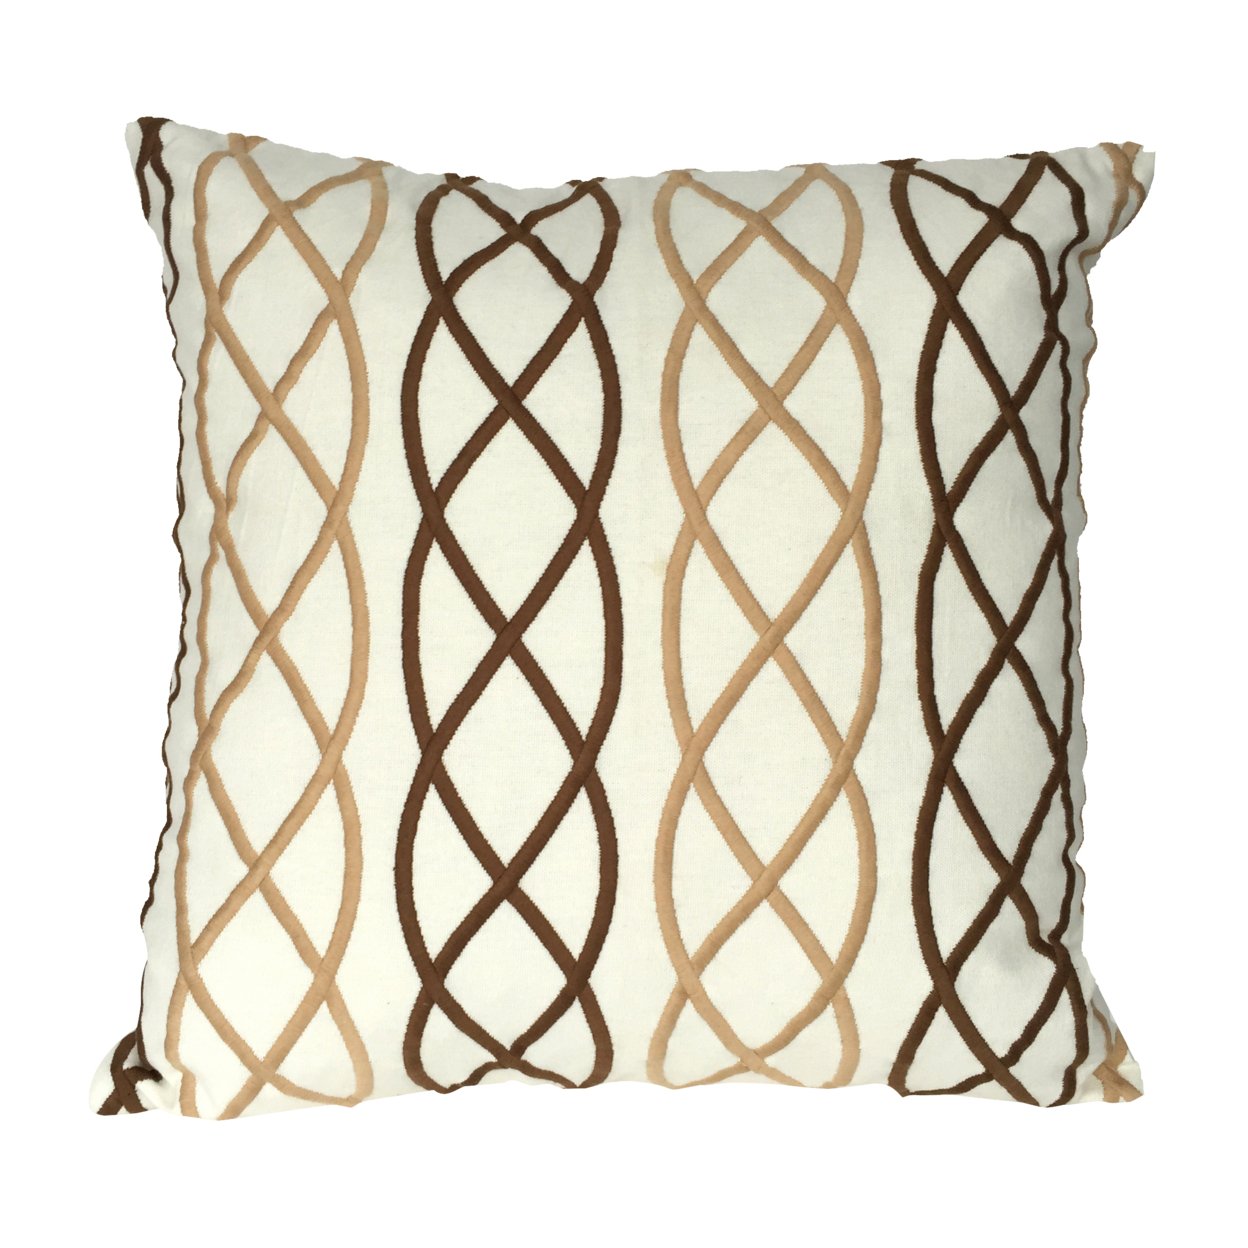 Contemporary Cotton Pillow With Lattice Details, White And Brown- Saltoro Sherpi